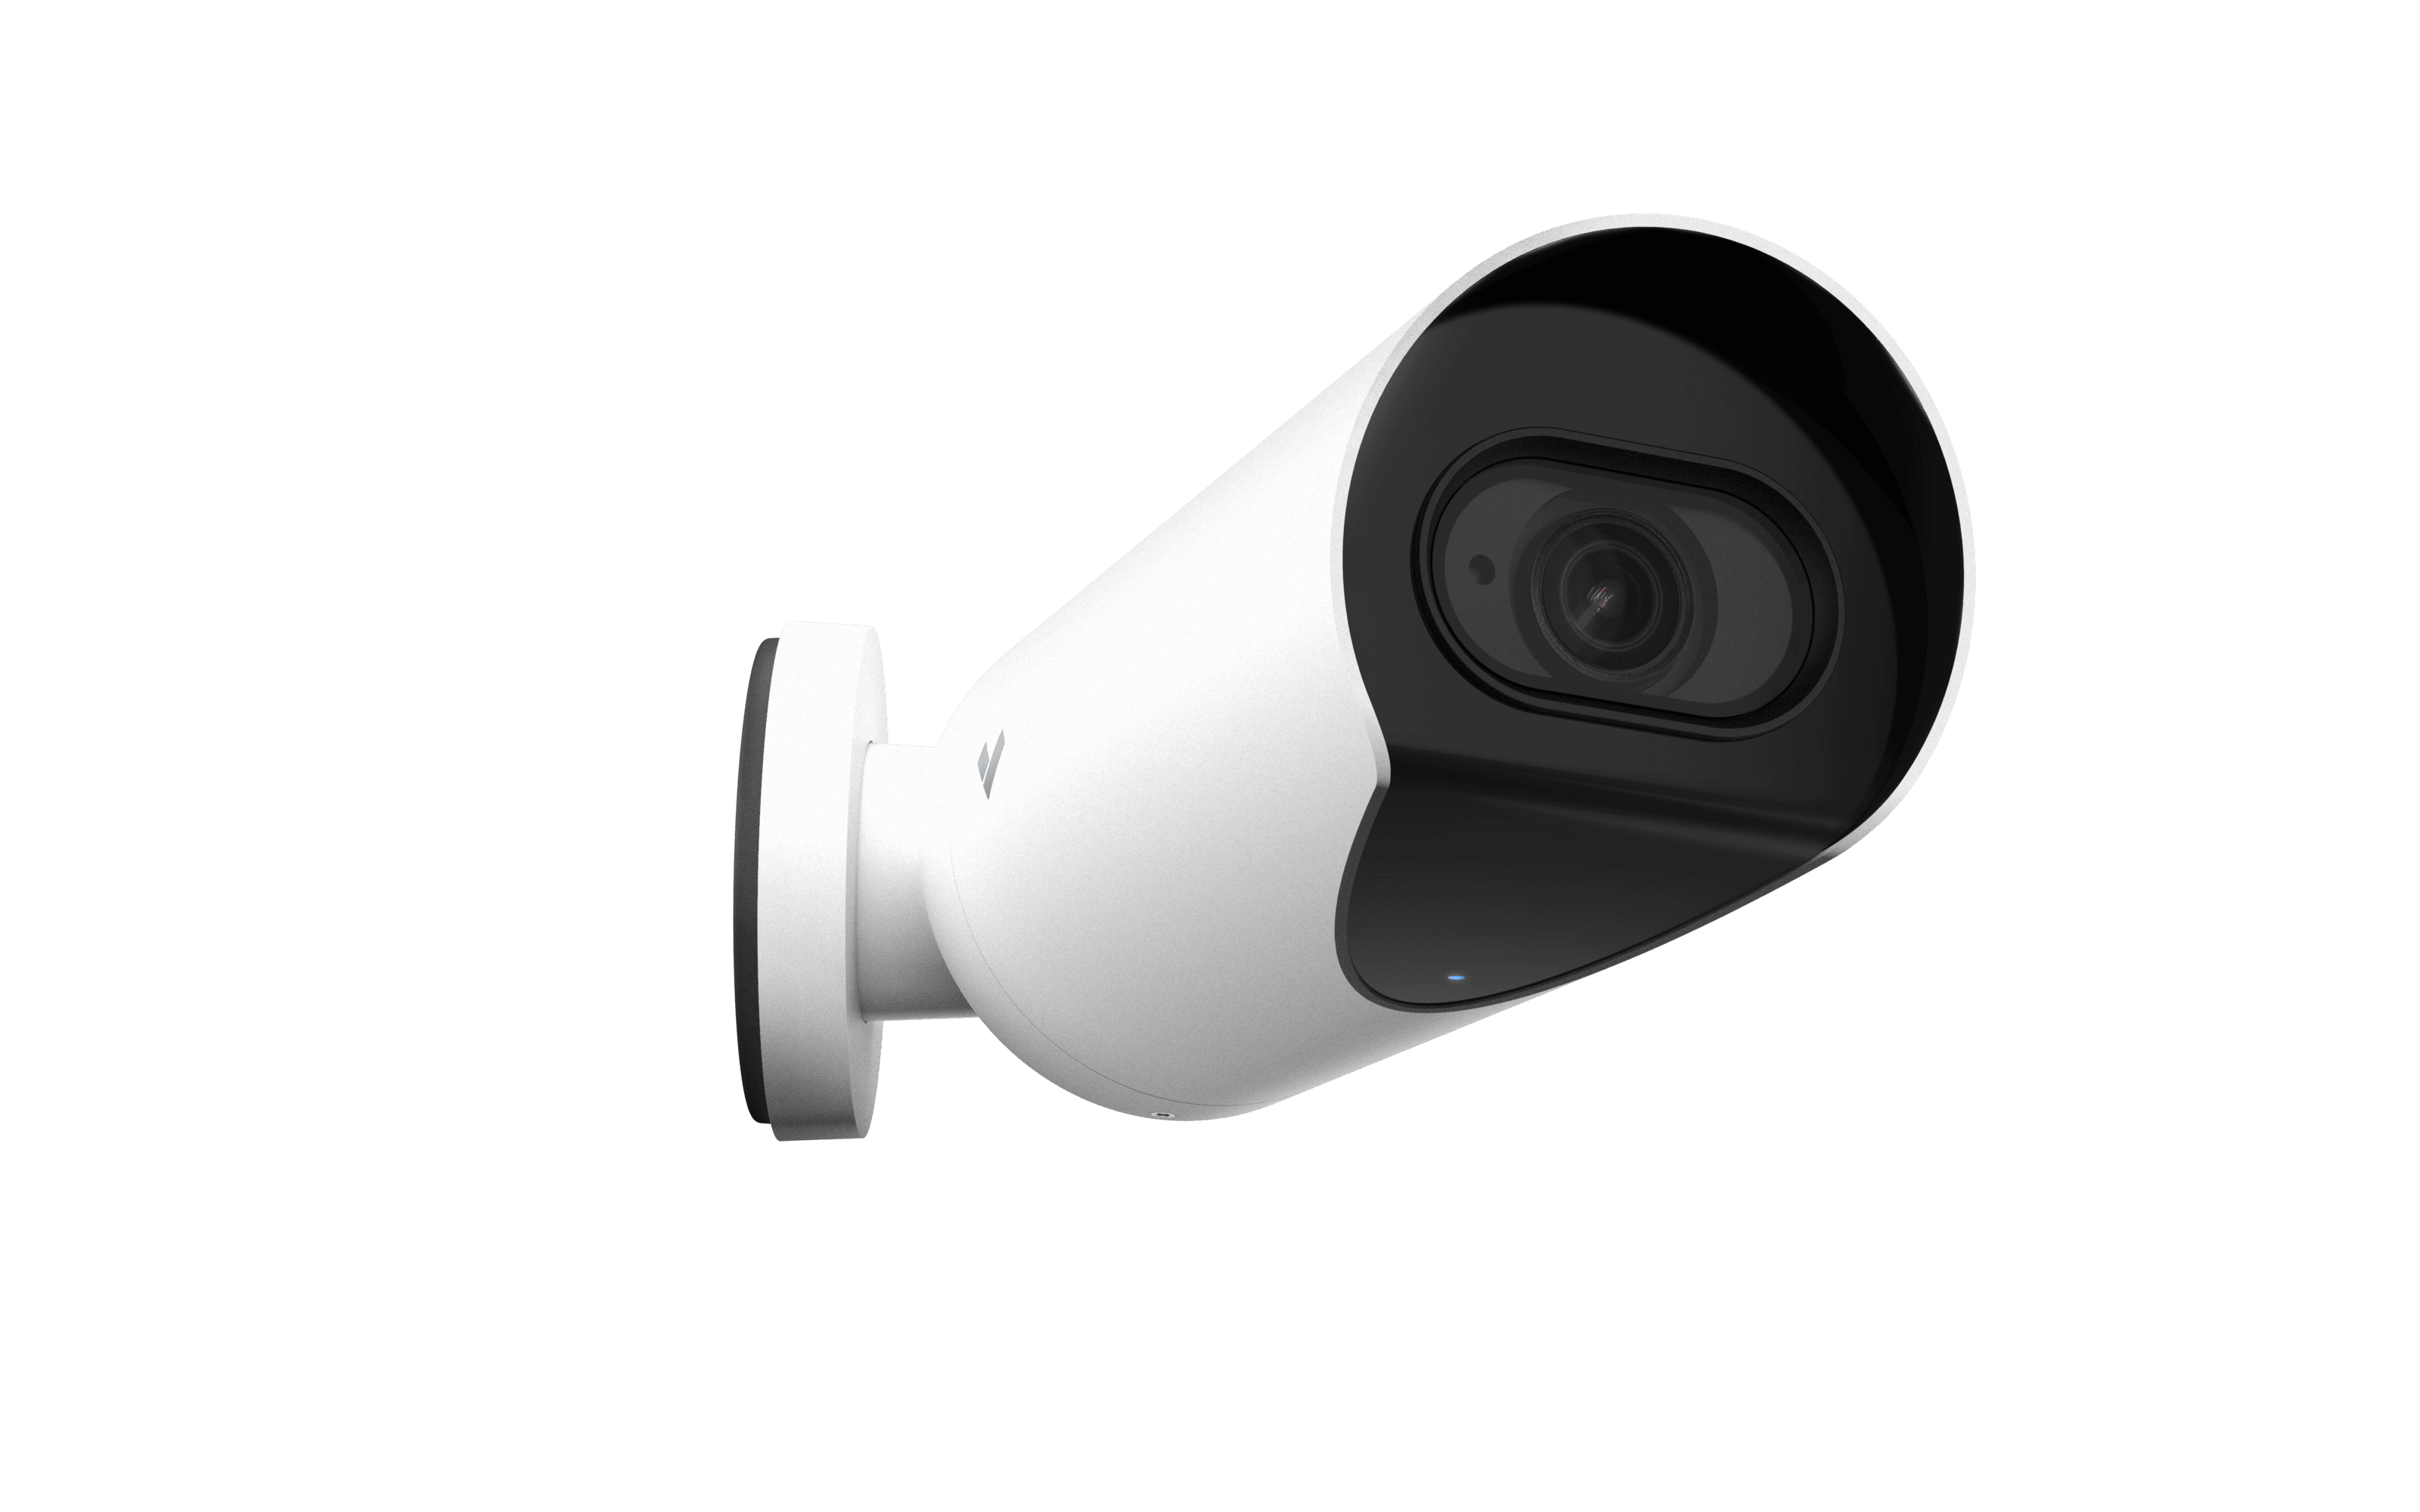 Verkada bullet camera used in the workplace for legal audio surveillance